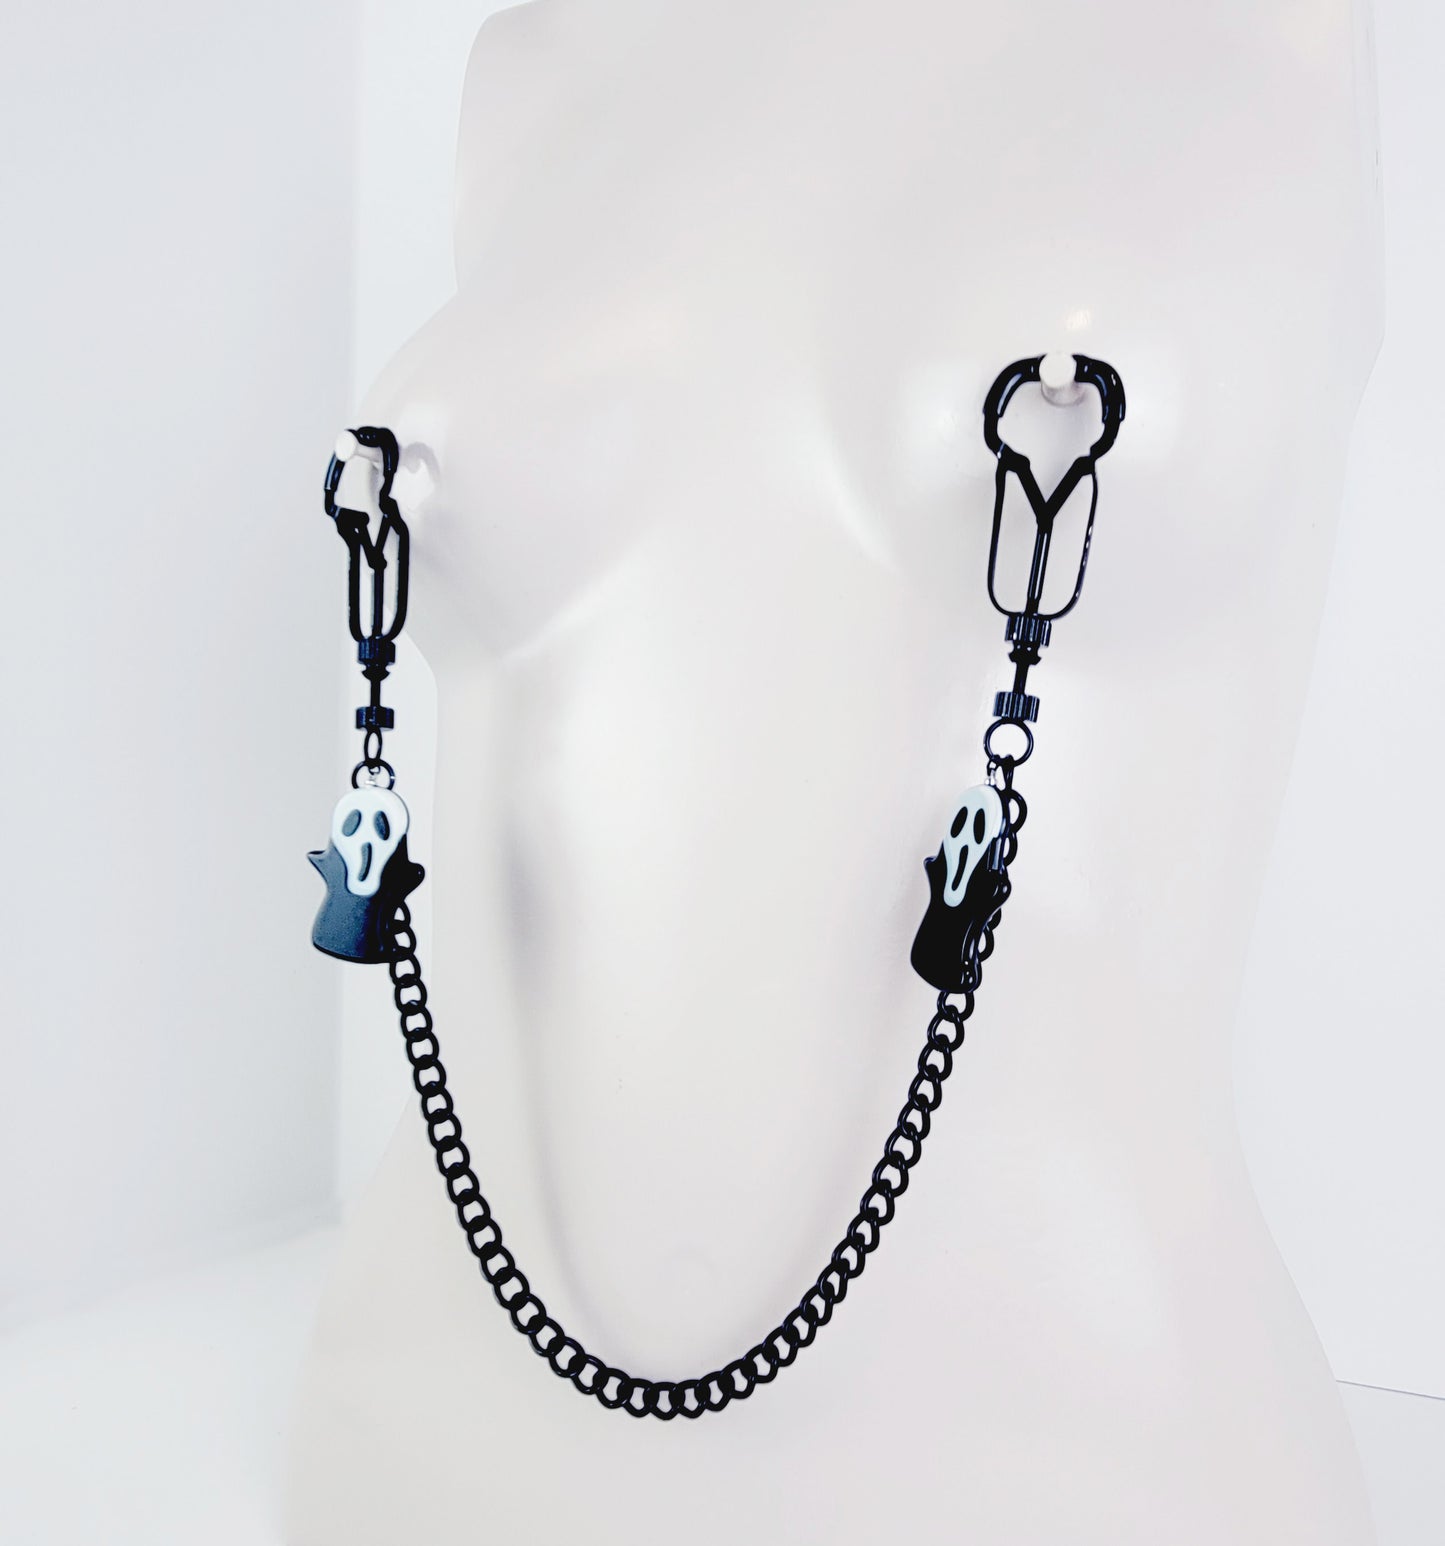 Black Nipple Clamps with Chain attached and Halloween Pendants. Black Beetle Clamps. BDSM, MATURE